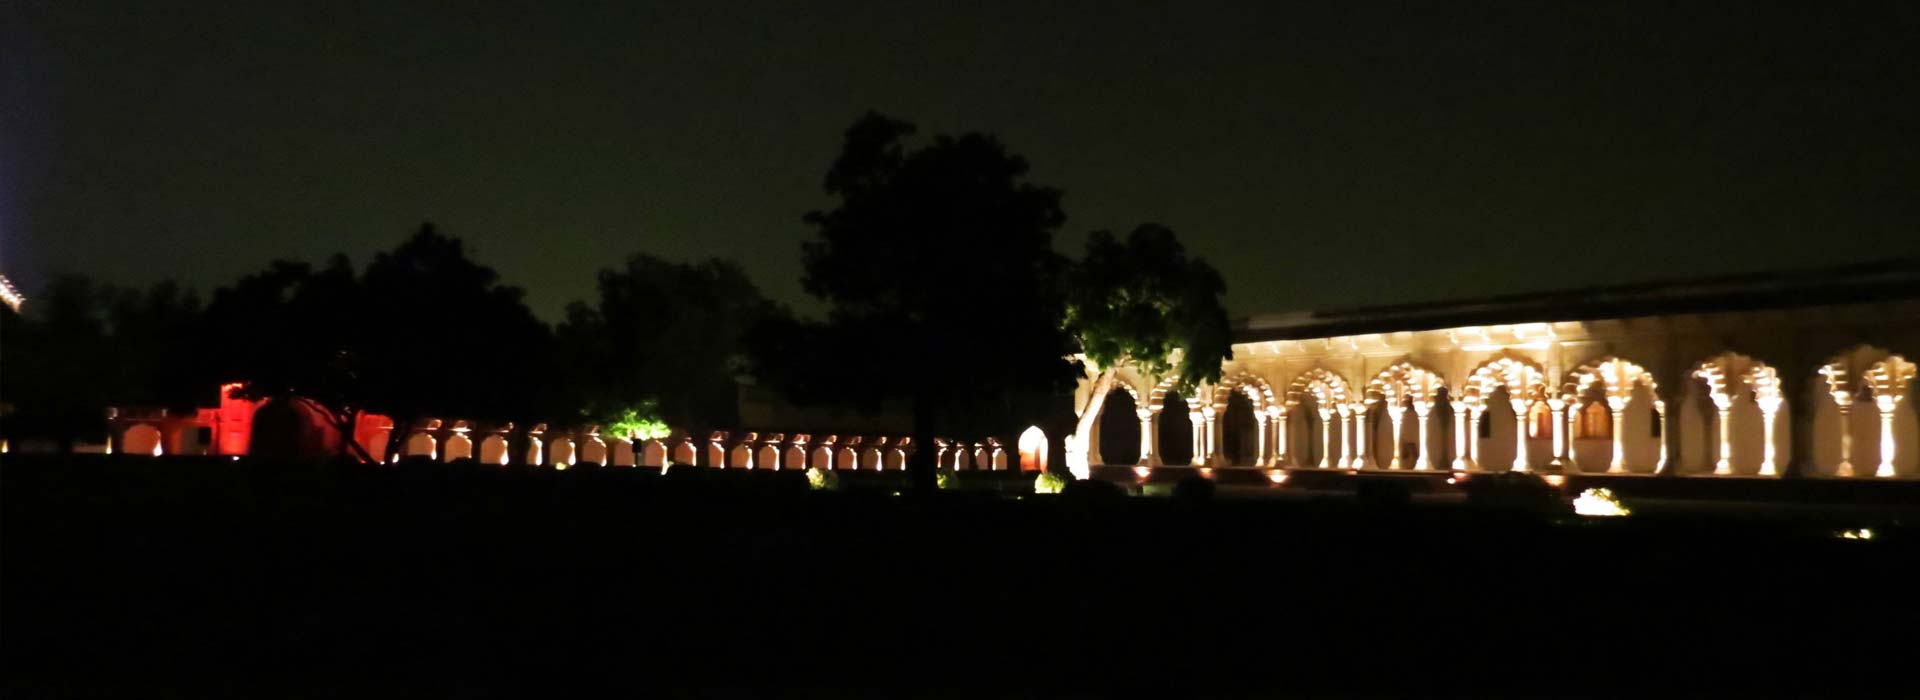 Light and sound show at agra fort